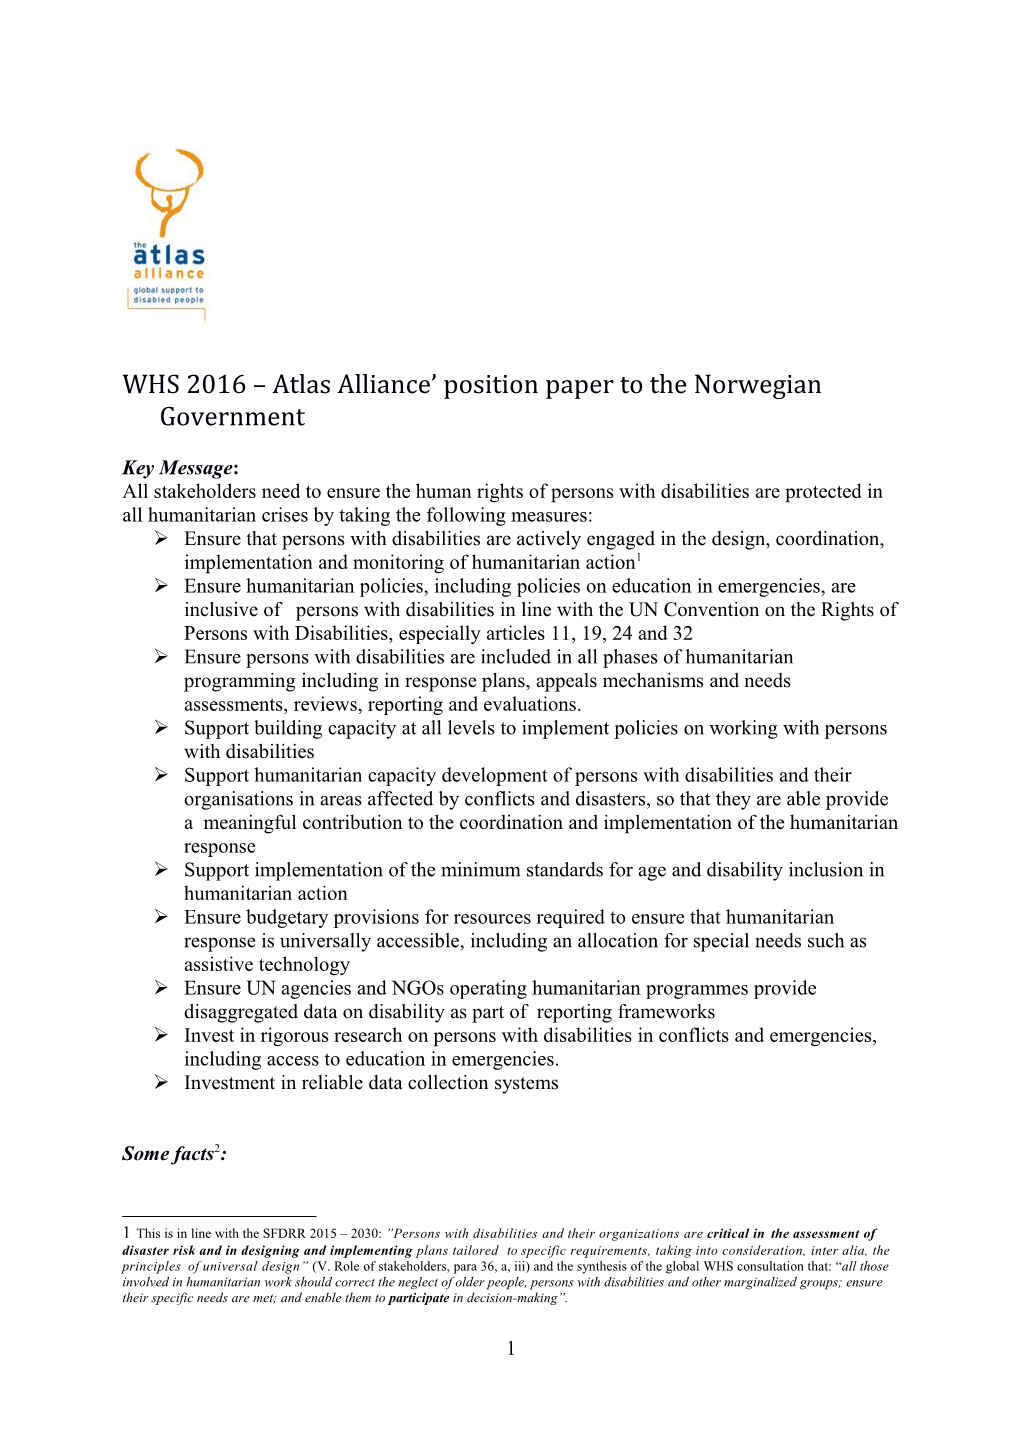 WHS 2016 Atlas Alliance Position Paper to the Norwegian Government